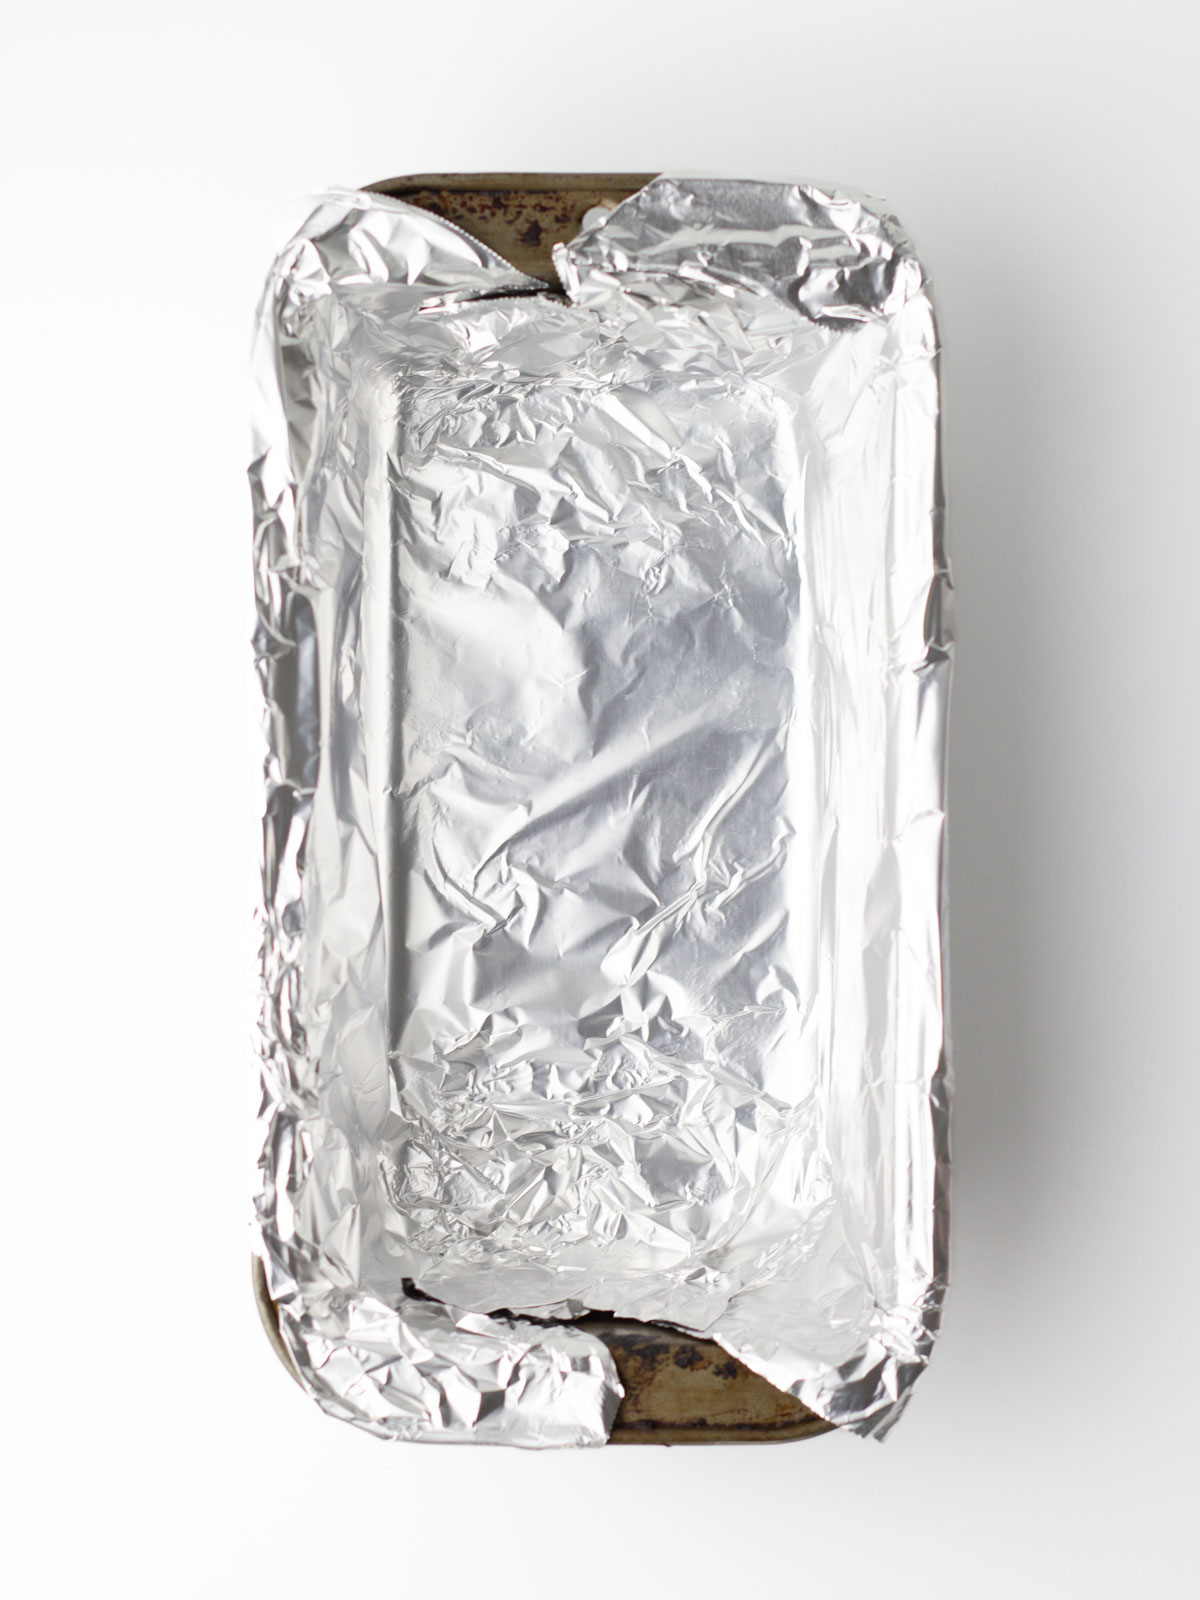 A metal loaf pan lined with aluminum foil.